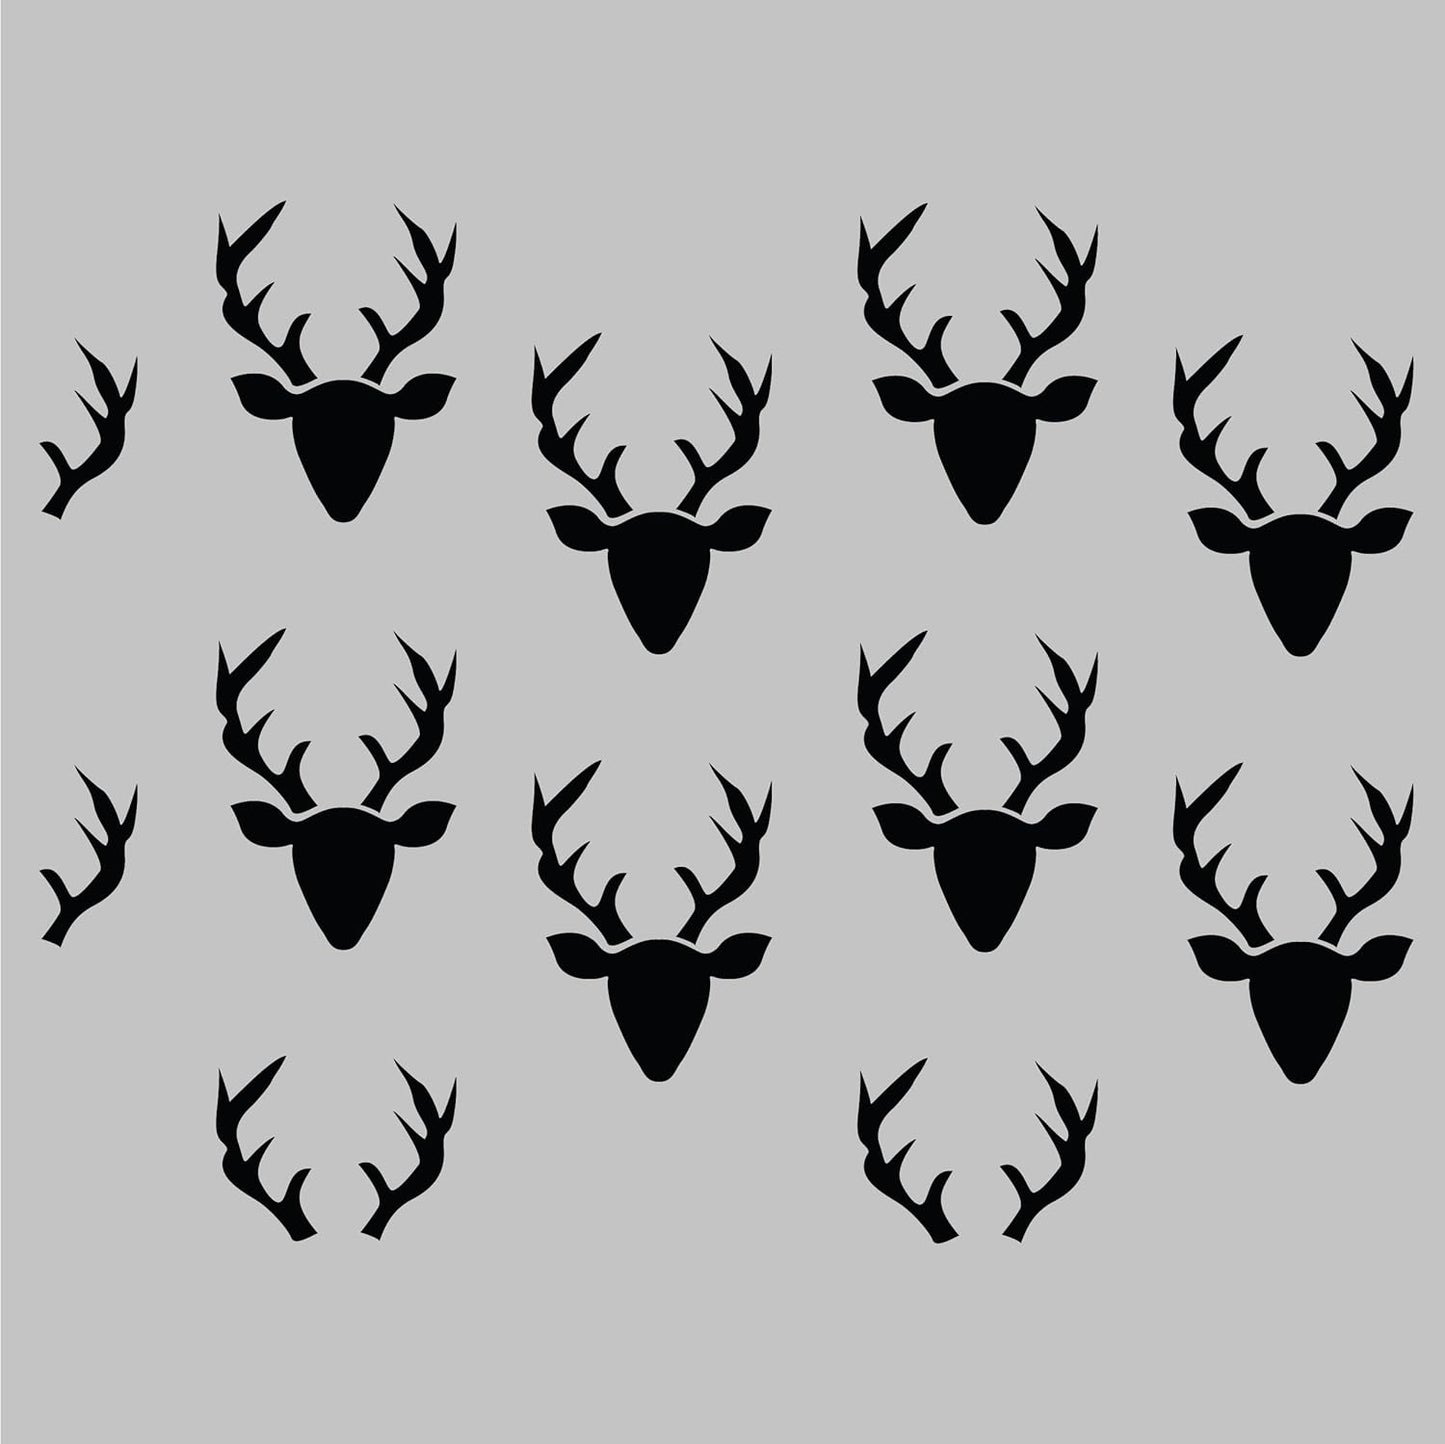 Latest Deer Pattern Kids Stencils for Wall Painting -Pack of 2, Sheet Size 12 x 12 inch/Design Size 10.5 x 9.5 inch.